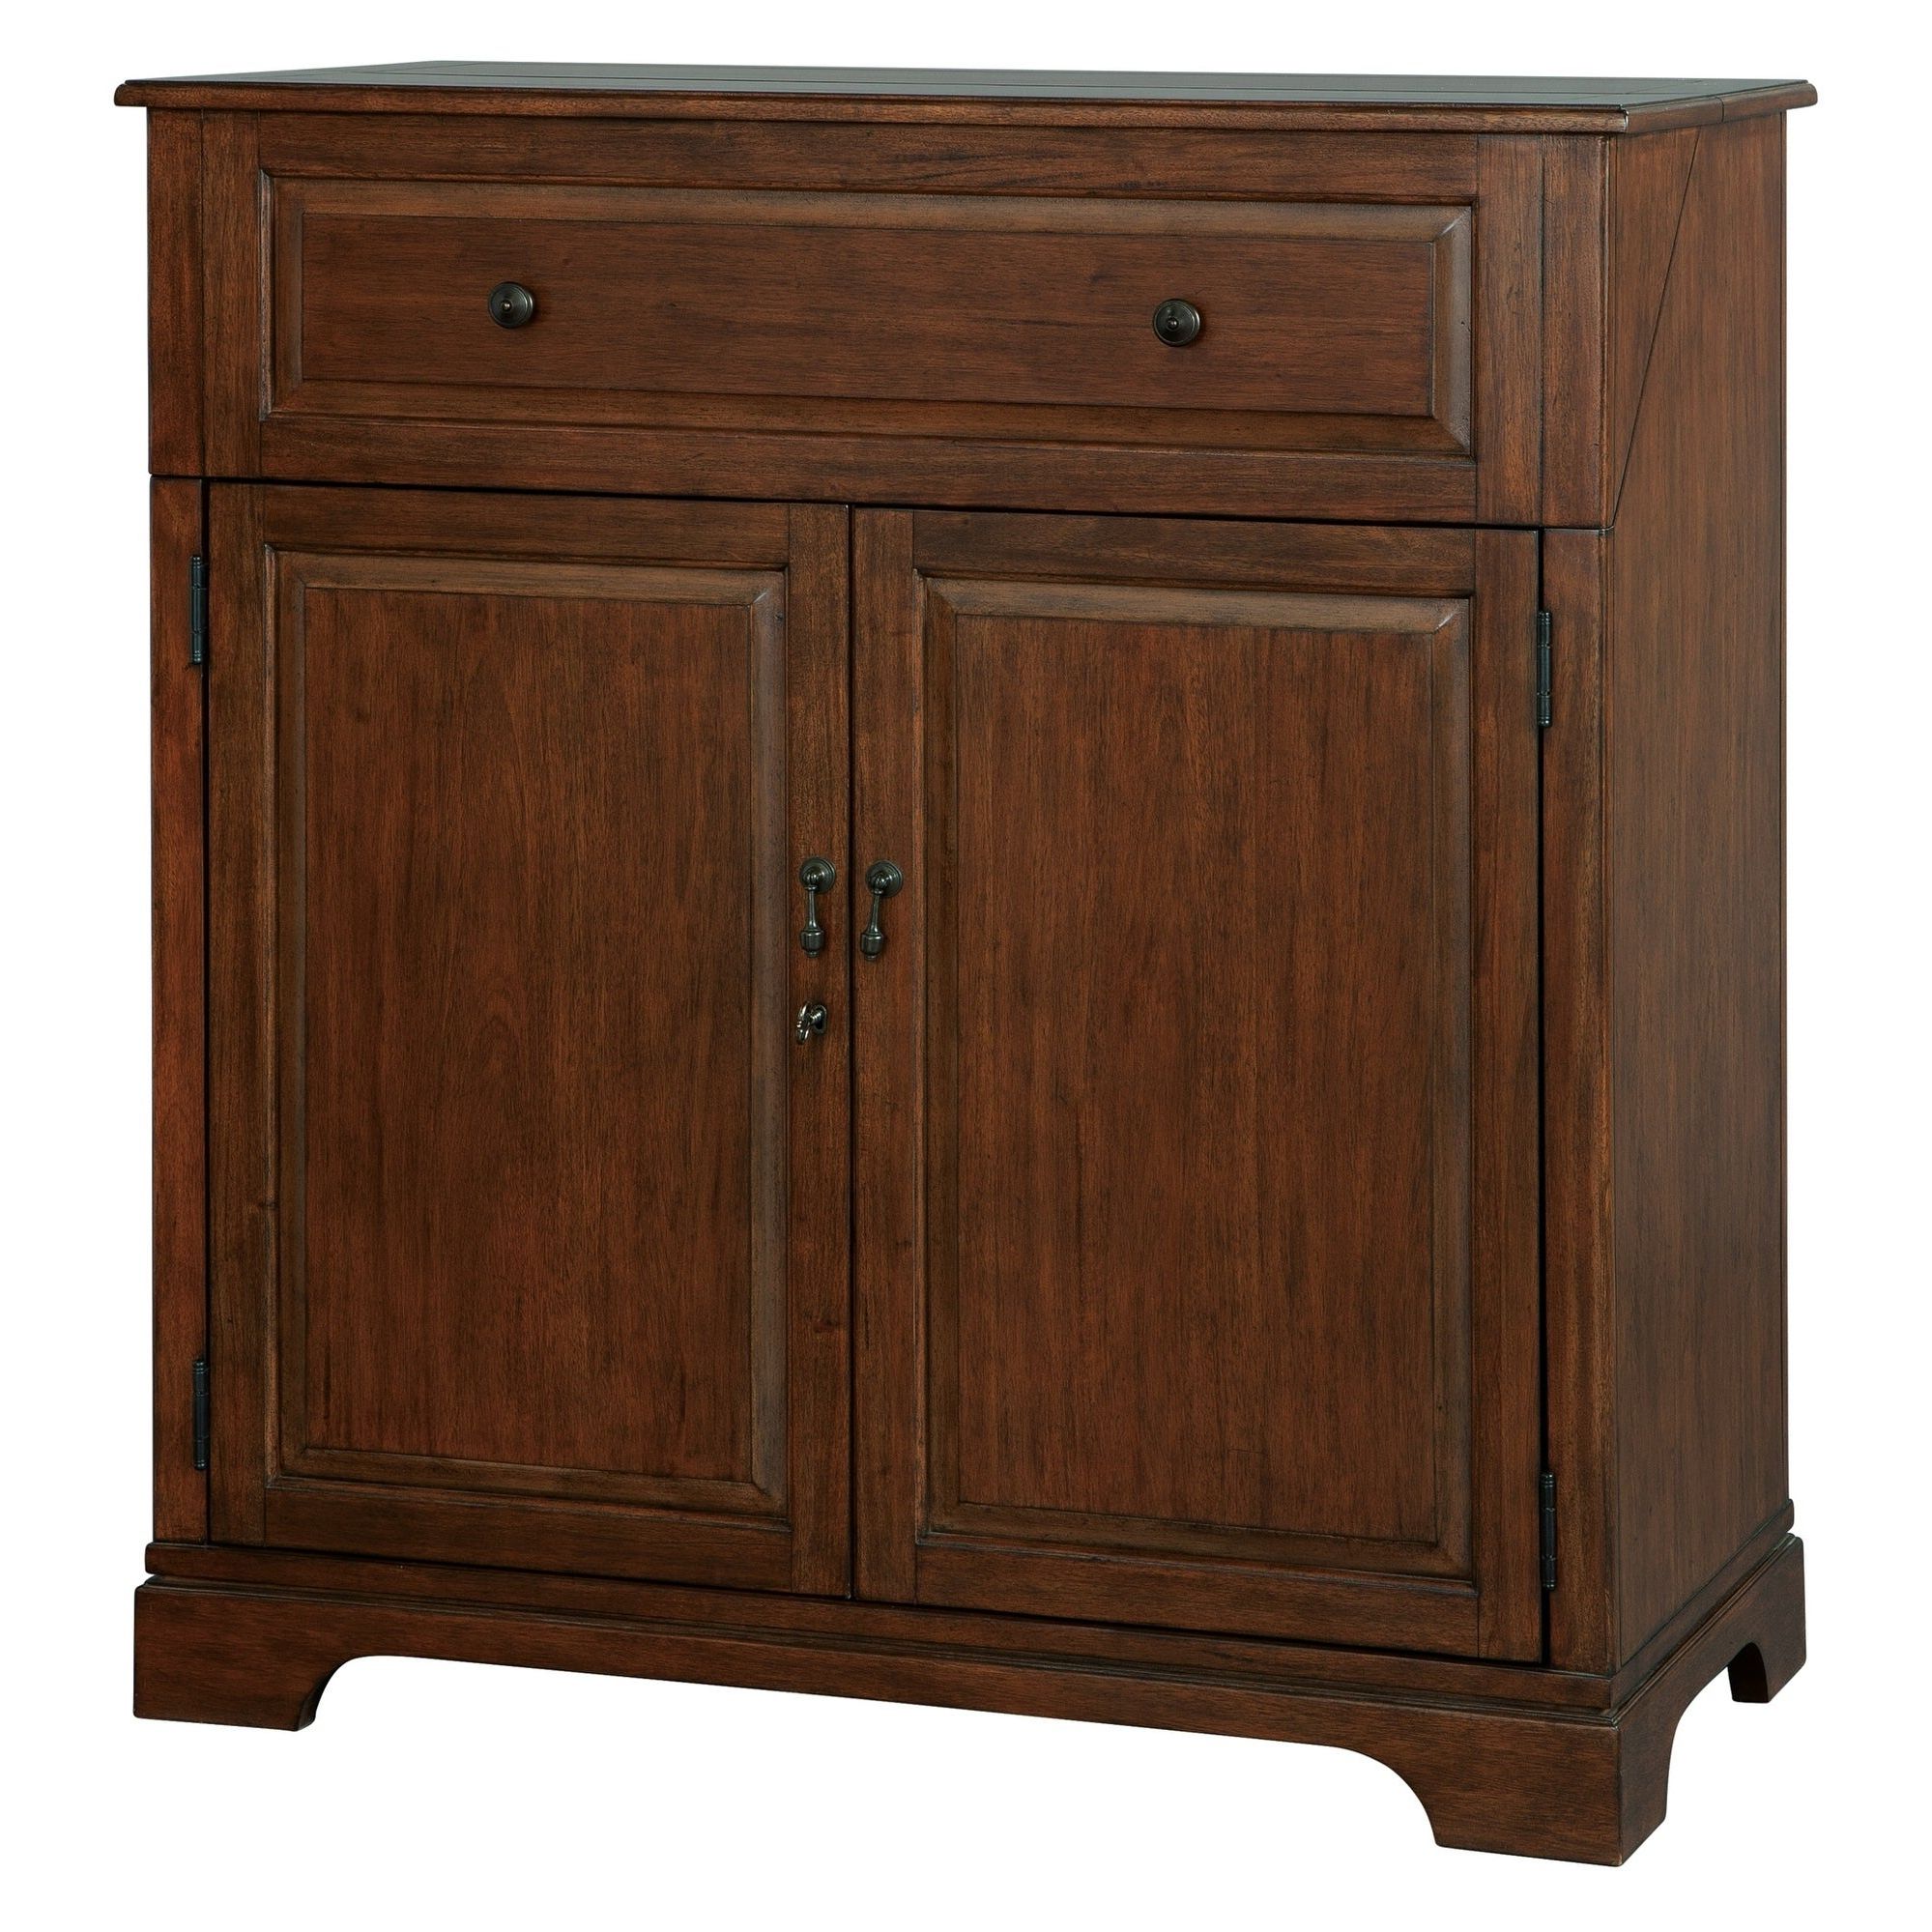 Howard Miller Good Cheer Contemporary, Sleek, Transitional Style, Foyer  Liquor Or Wine Cabinet, Sideboard, Or Media Cabinet Regarding Upper Stanton Sideboards (View 11 of 20)